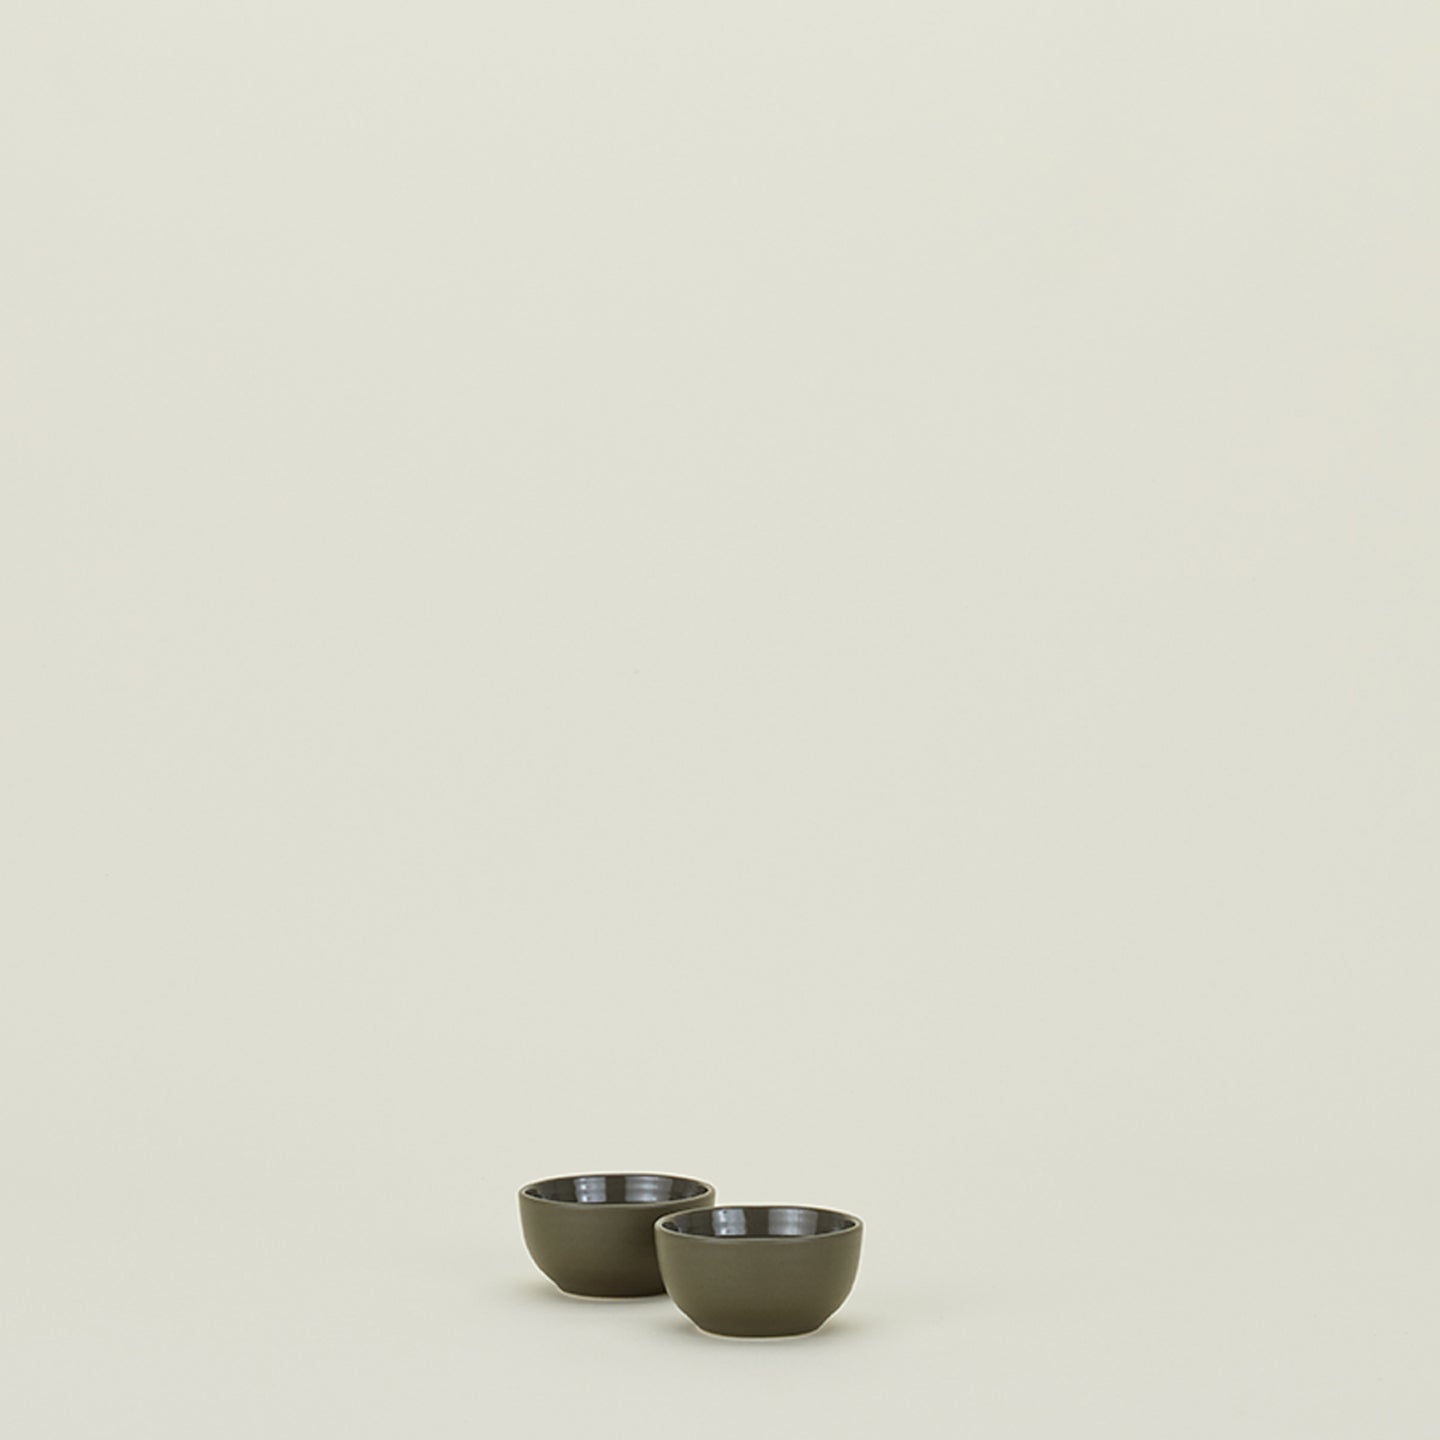 Essential Extra Small Bowl, Set of 2 - Olive